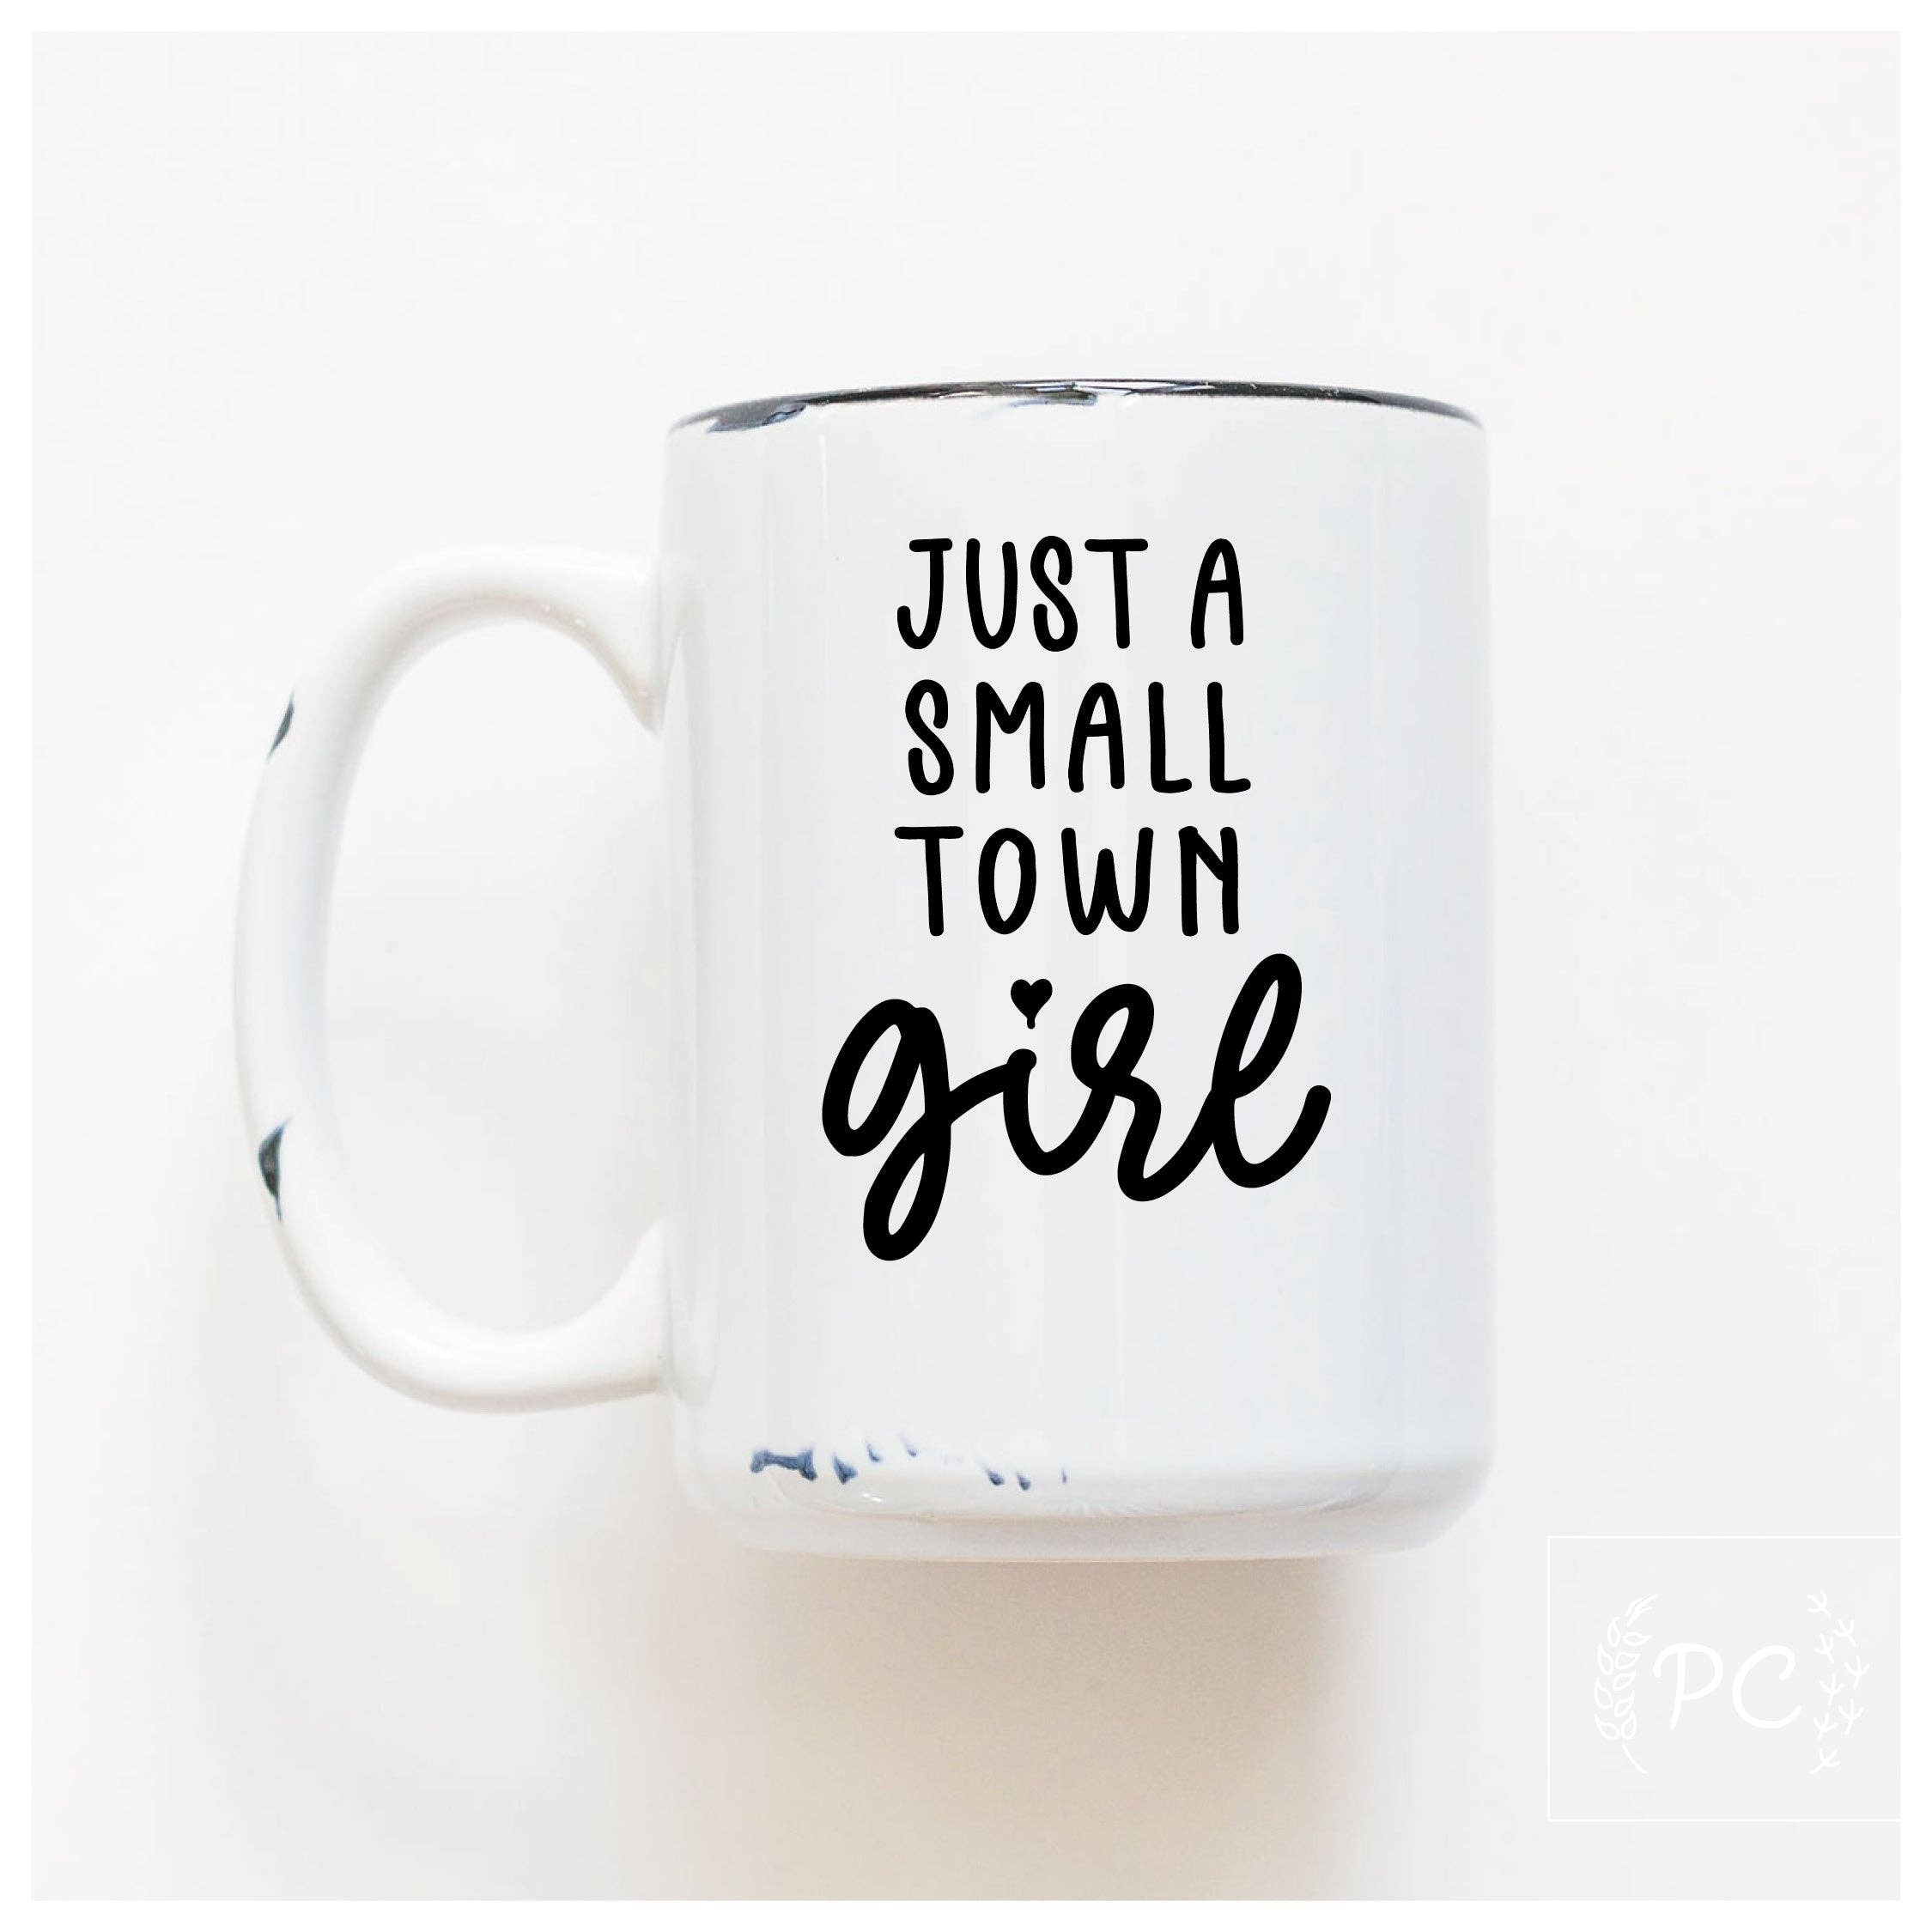 White mug with text "Just a Small Town Girl"